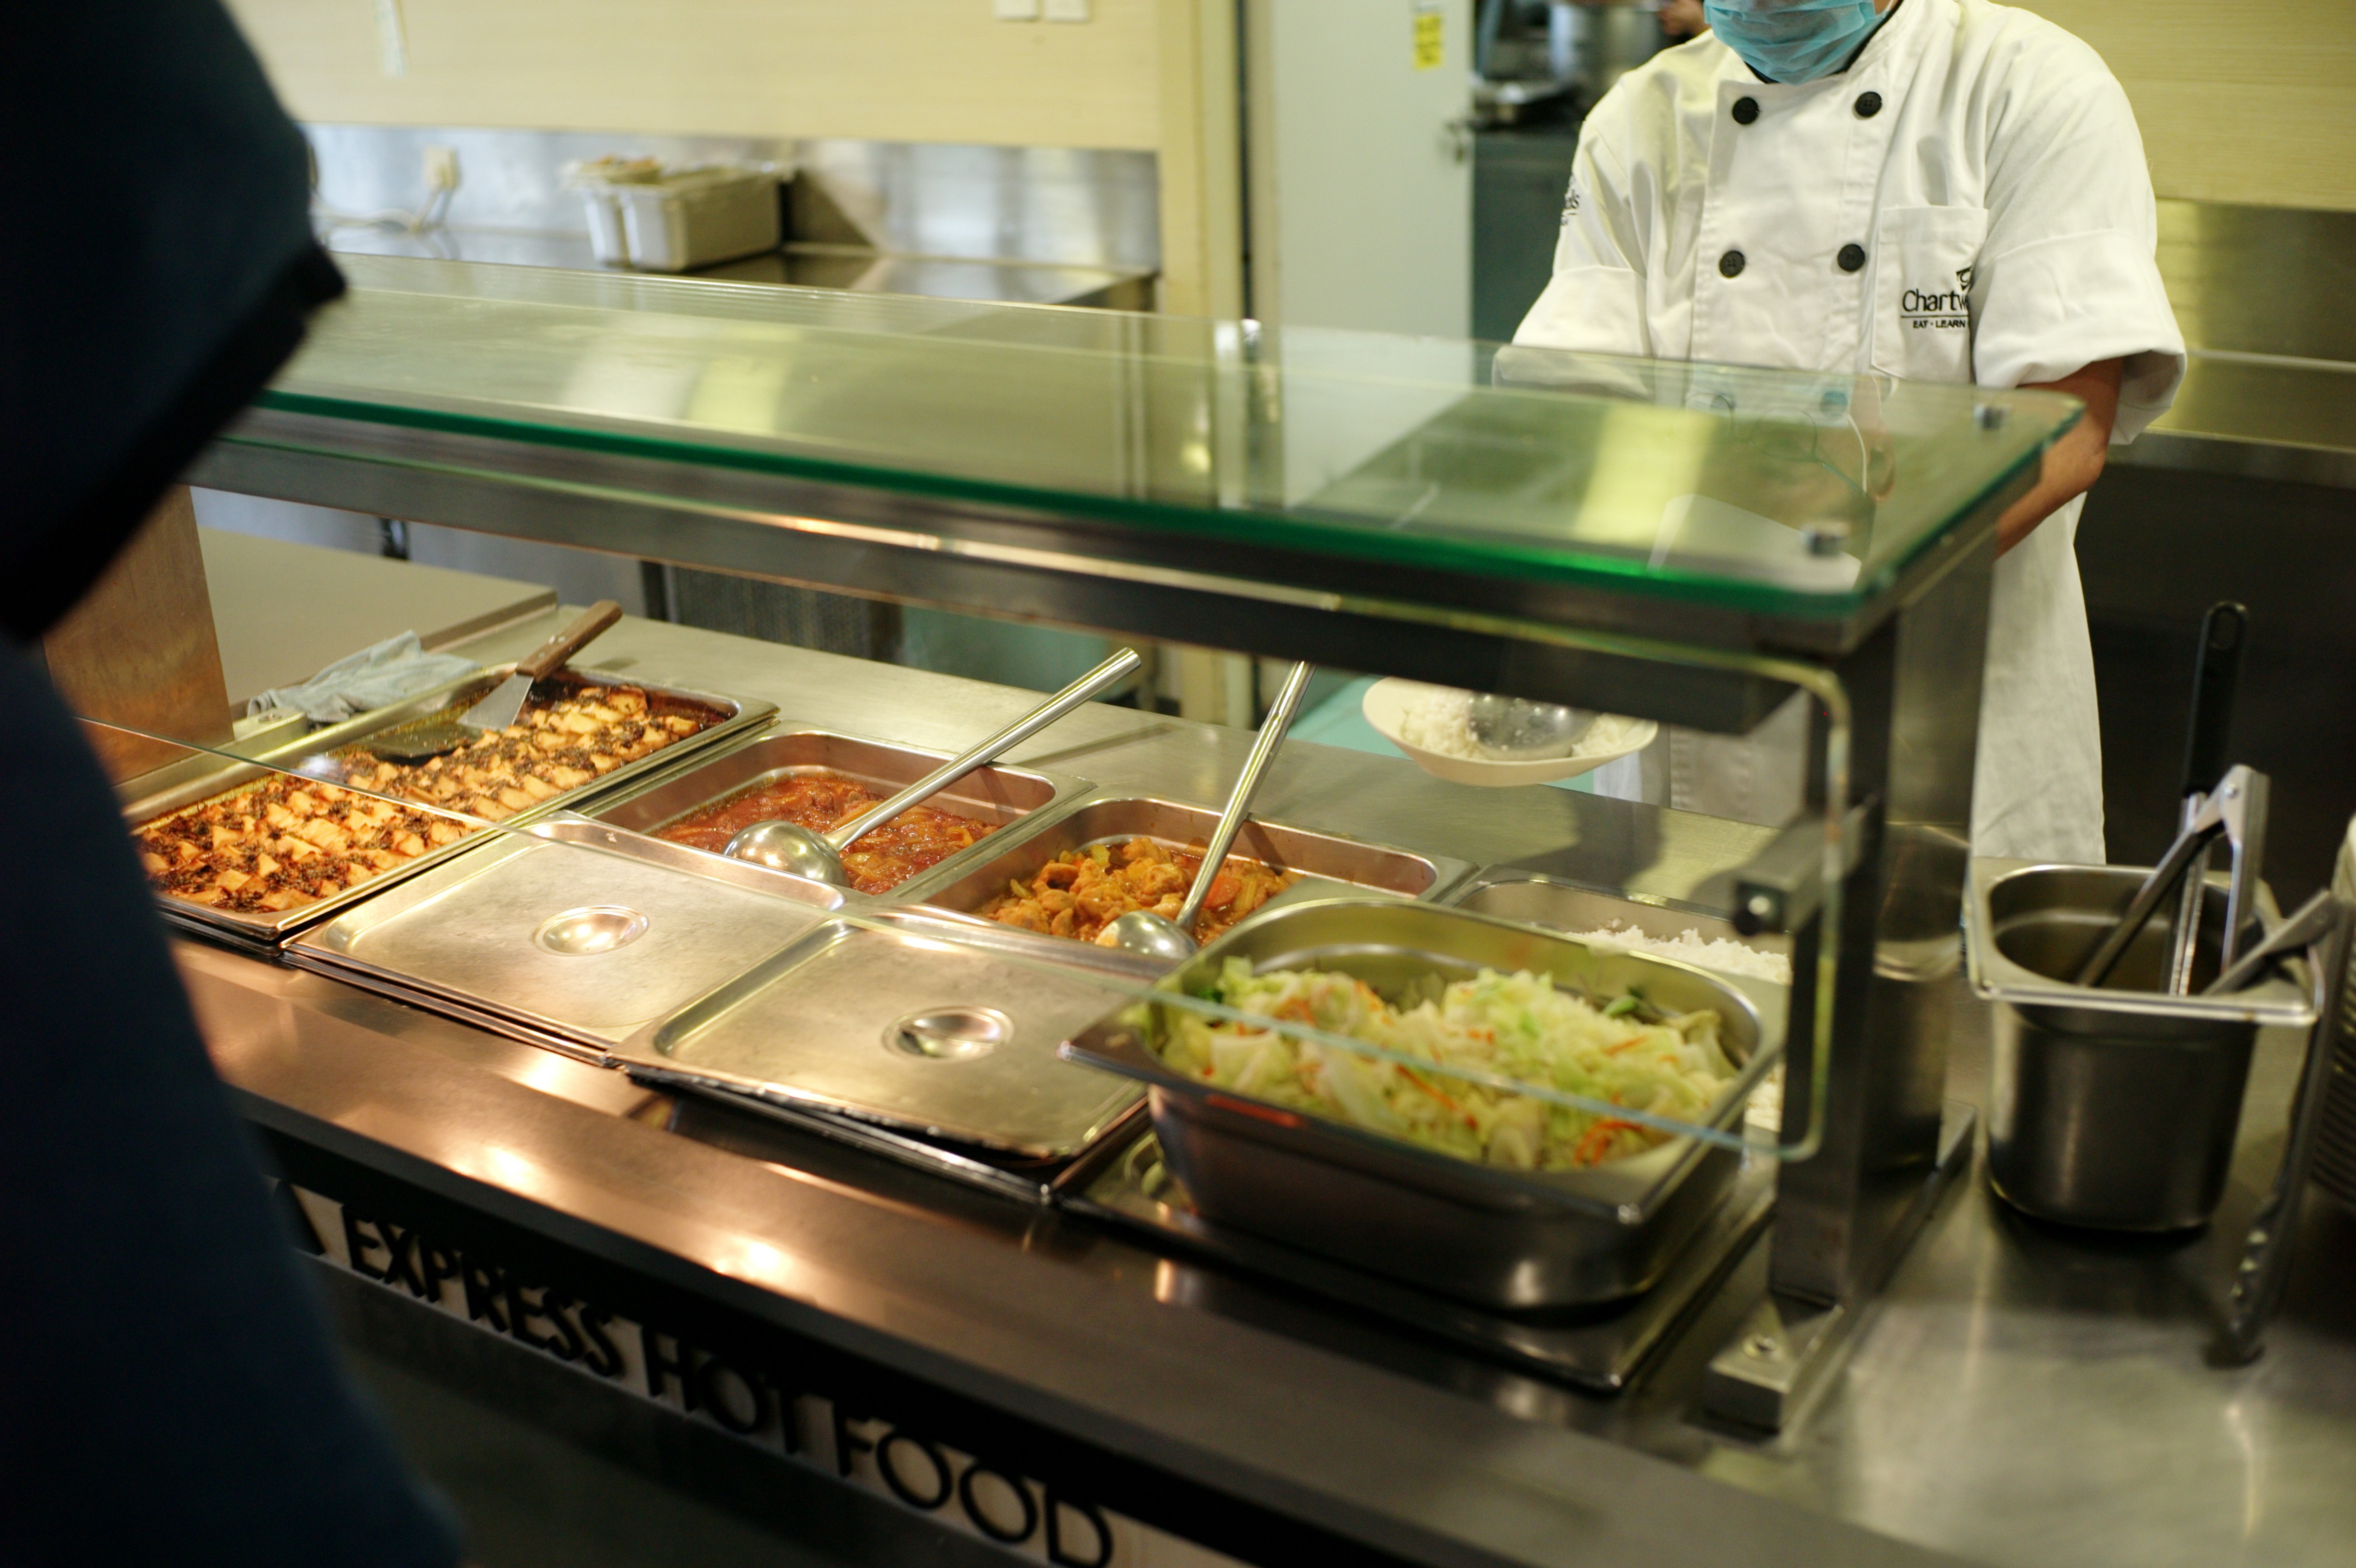 Some of the canteen options at South Island School